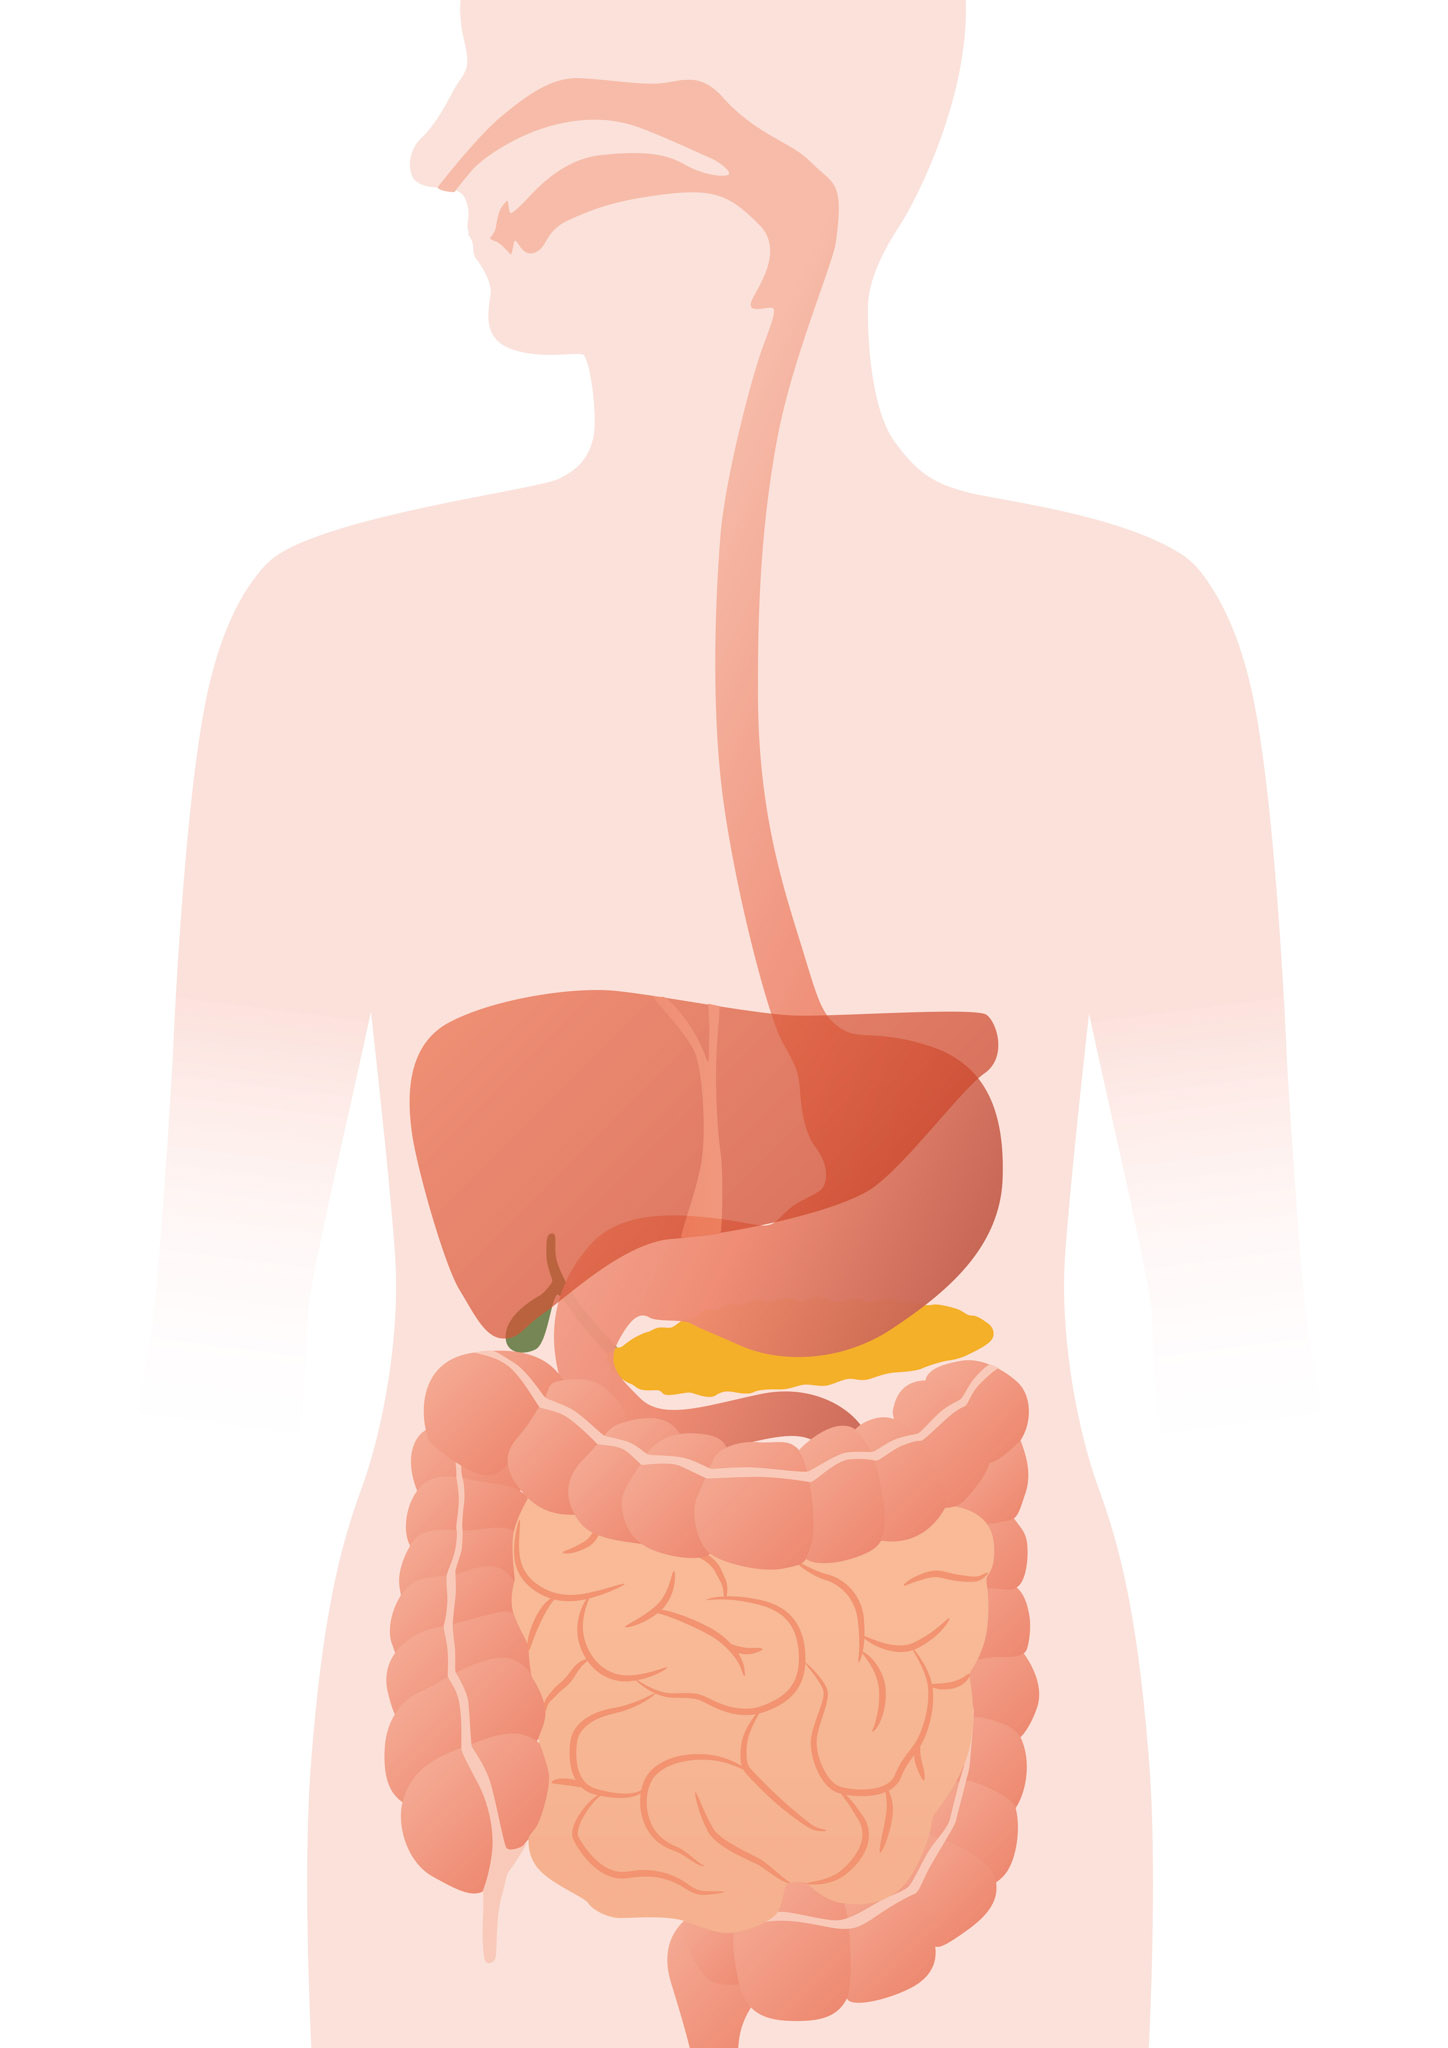 A drawing of a human digestive system